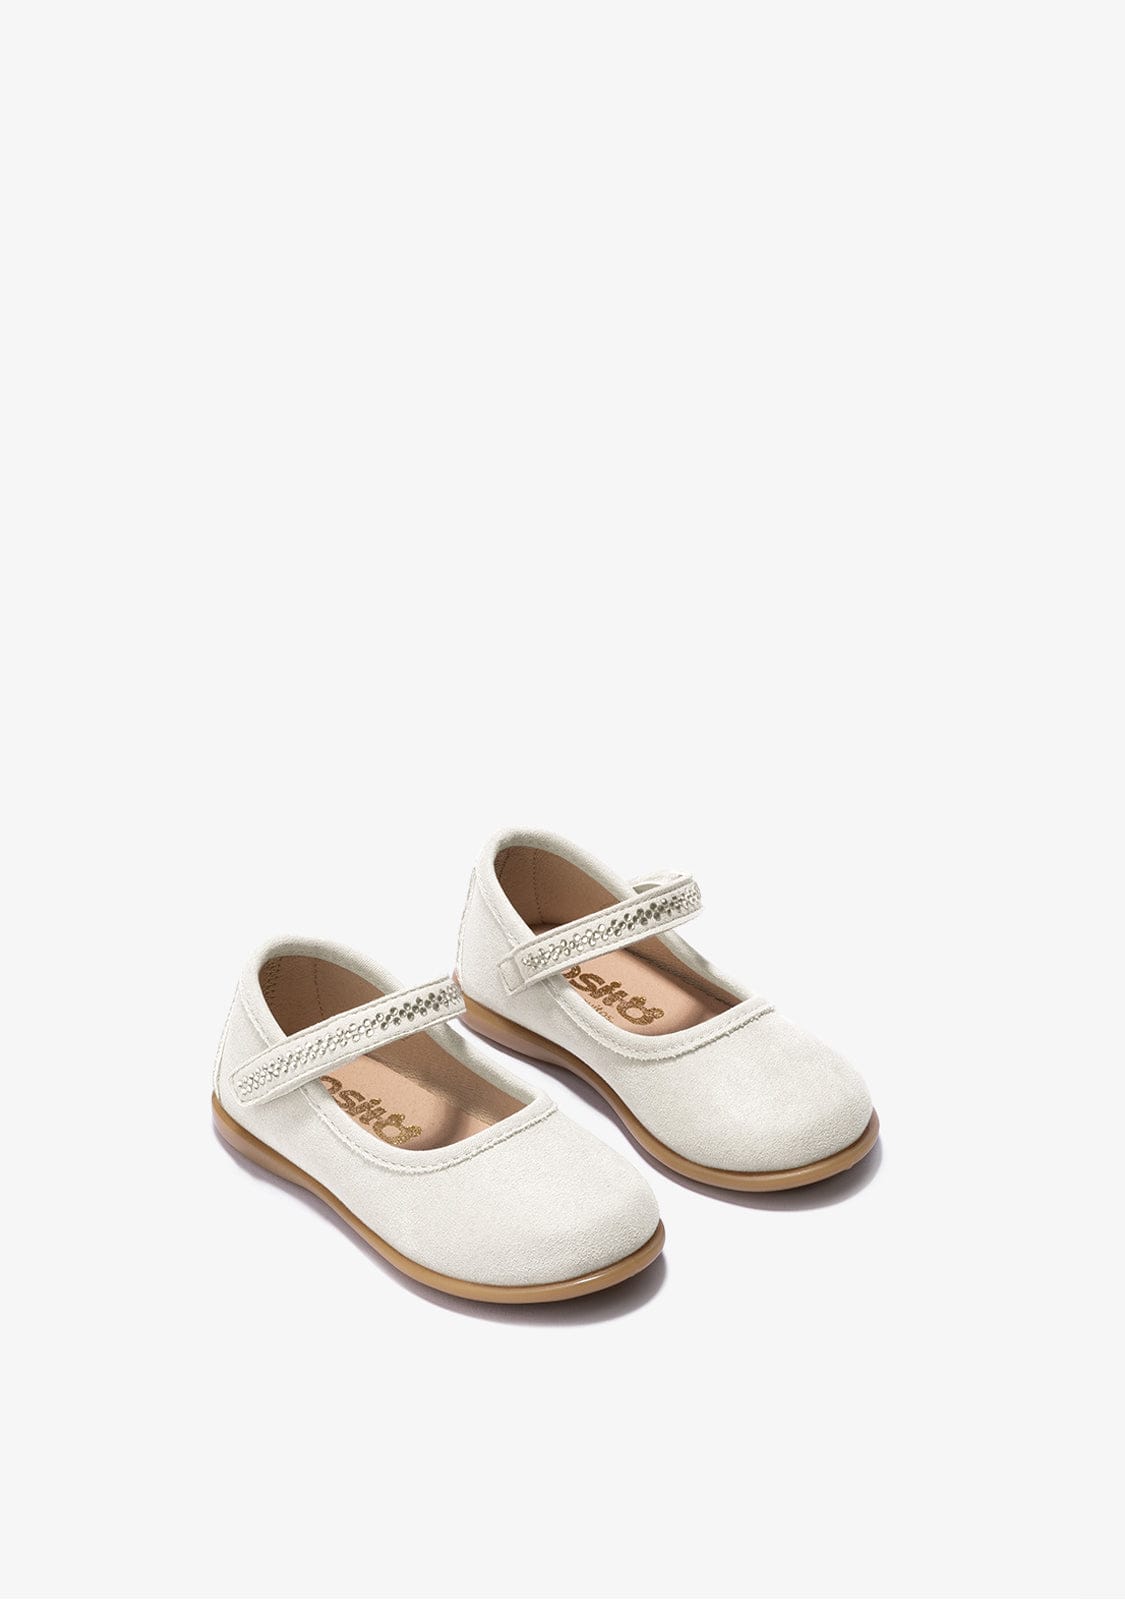 OSITO Shoes Baby's Sand Adherent Strip Ballerinas